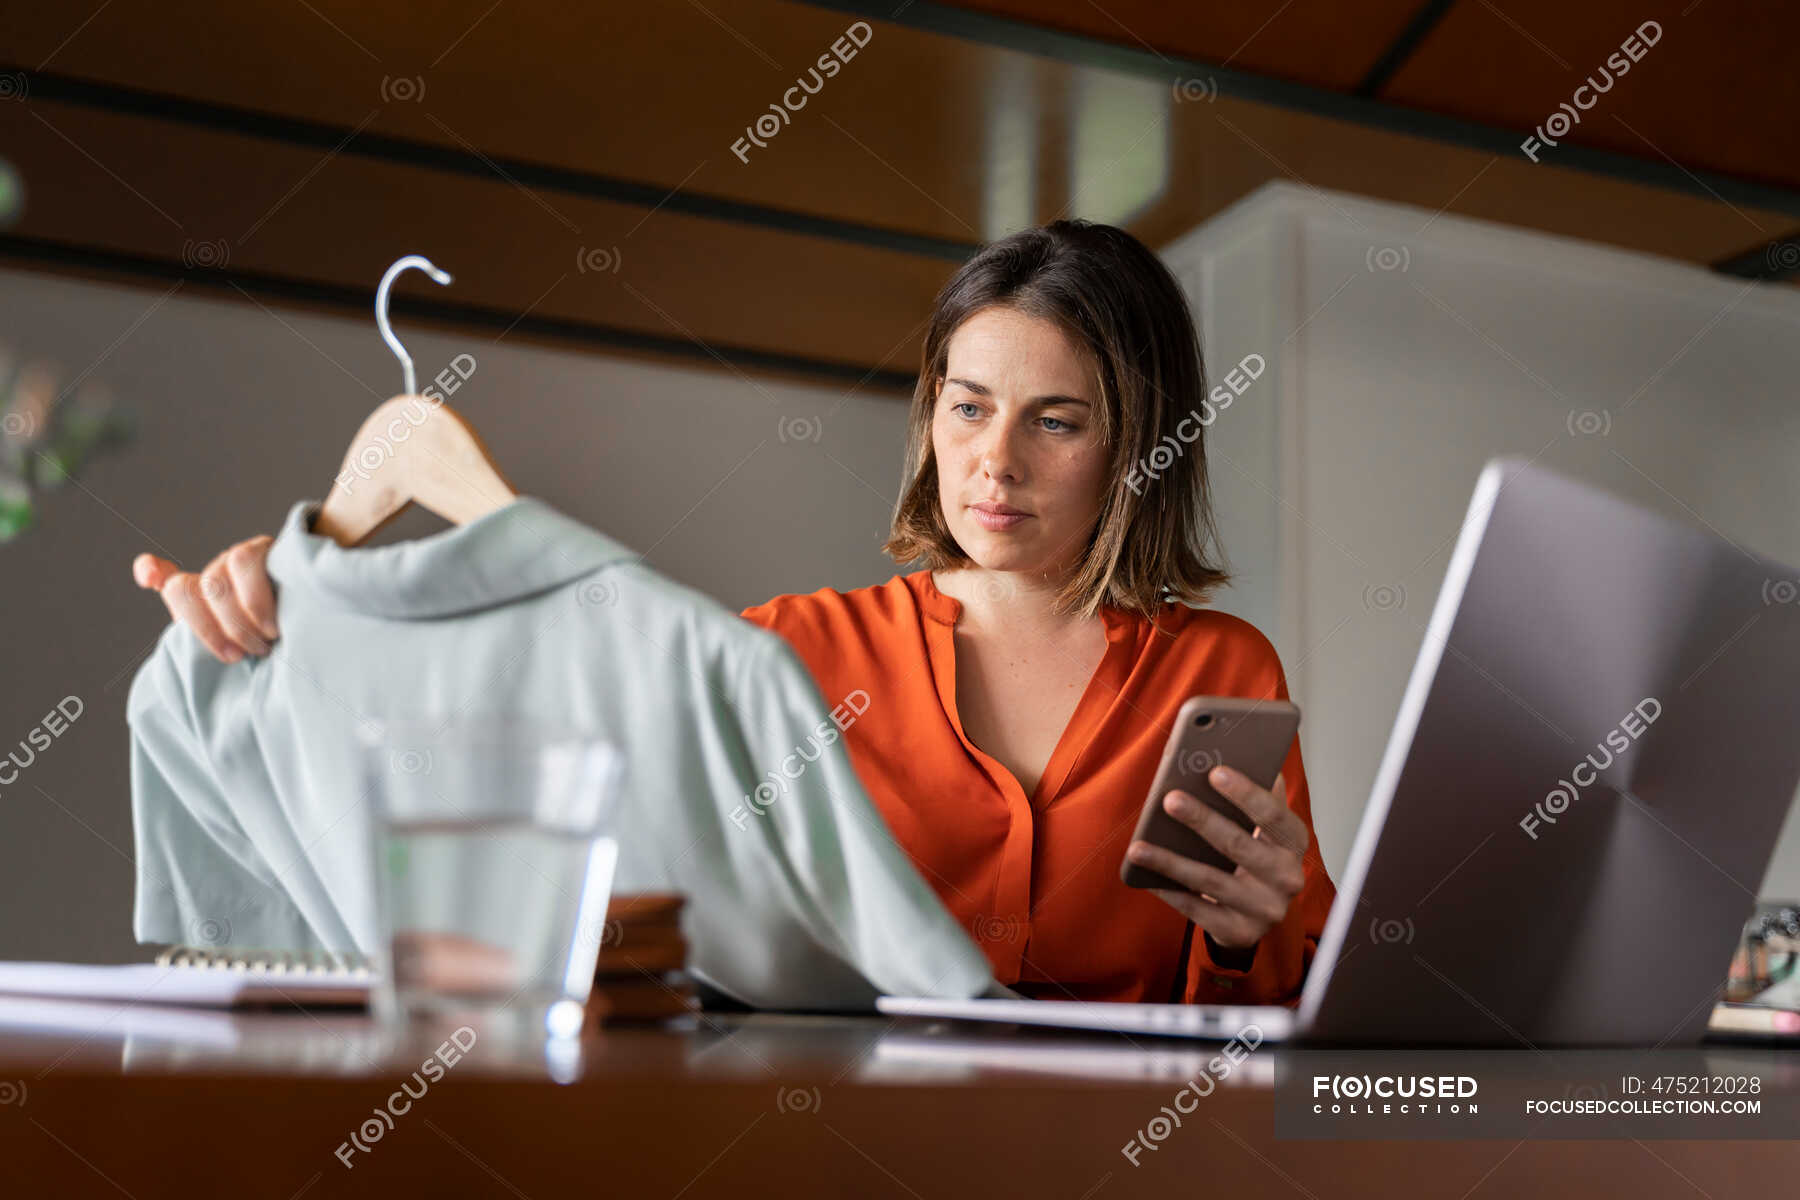 businesswoman-with-smart-phone-looking-at-clothes-while-sitting-at-home